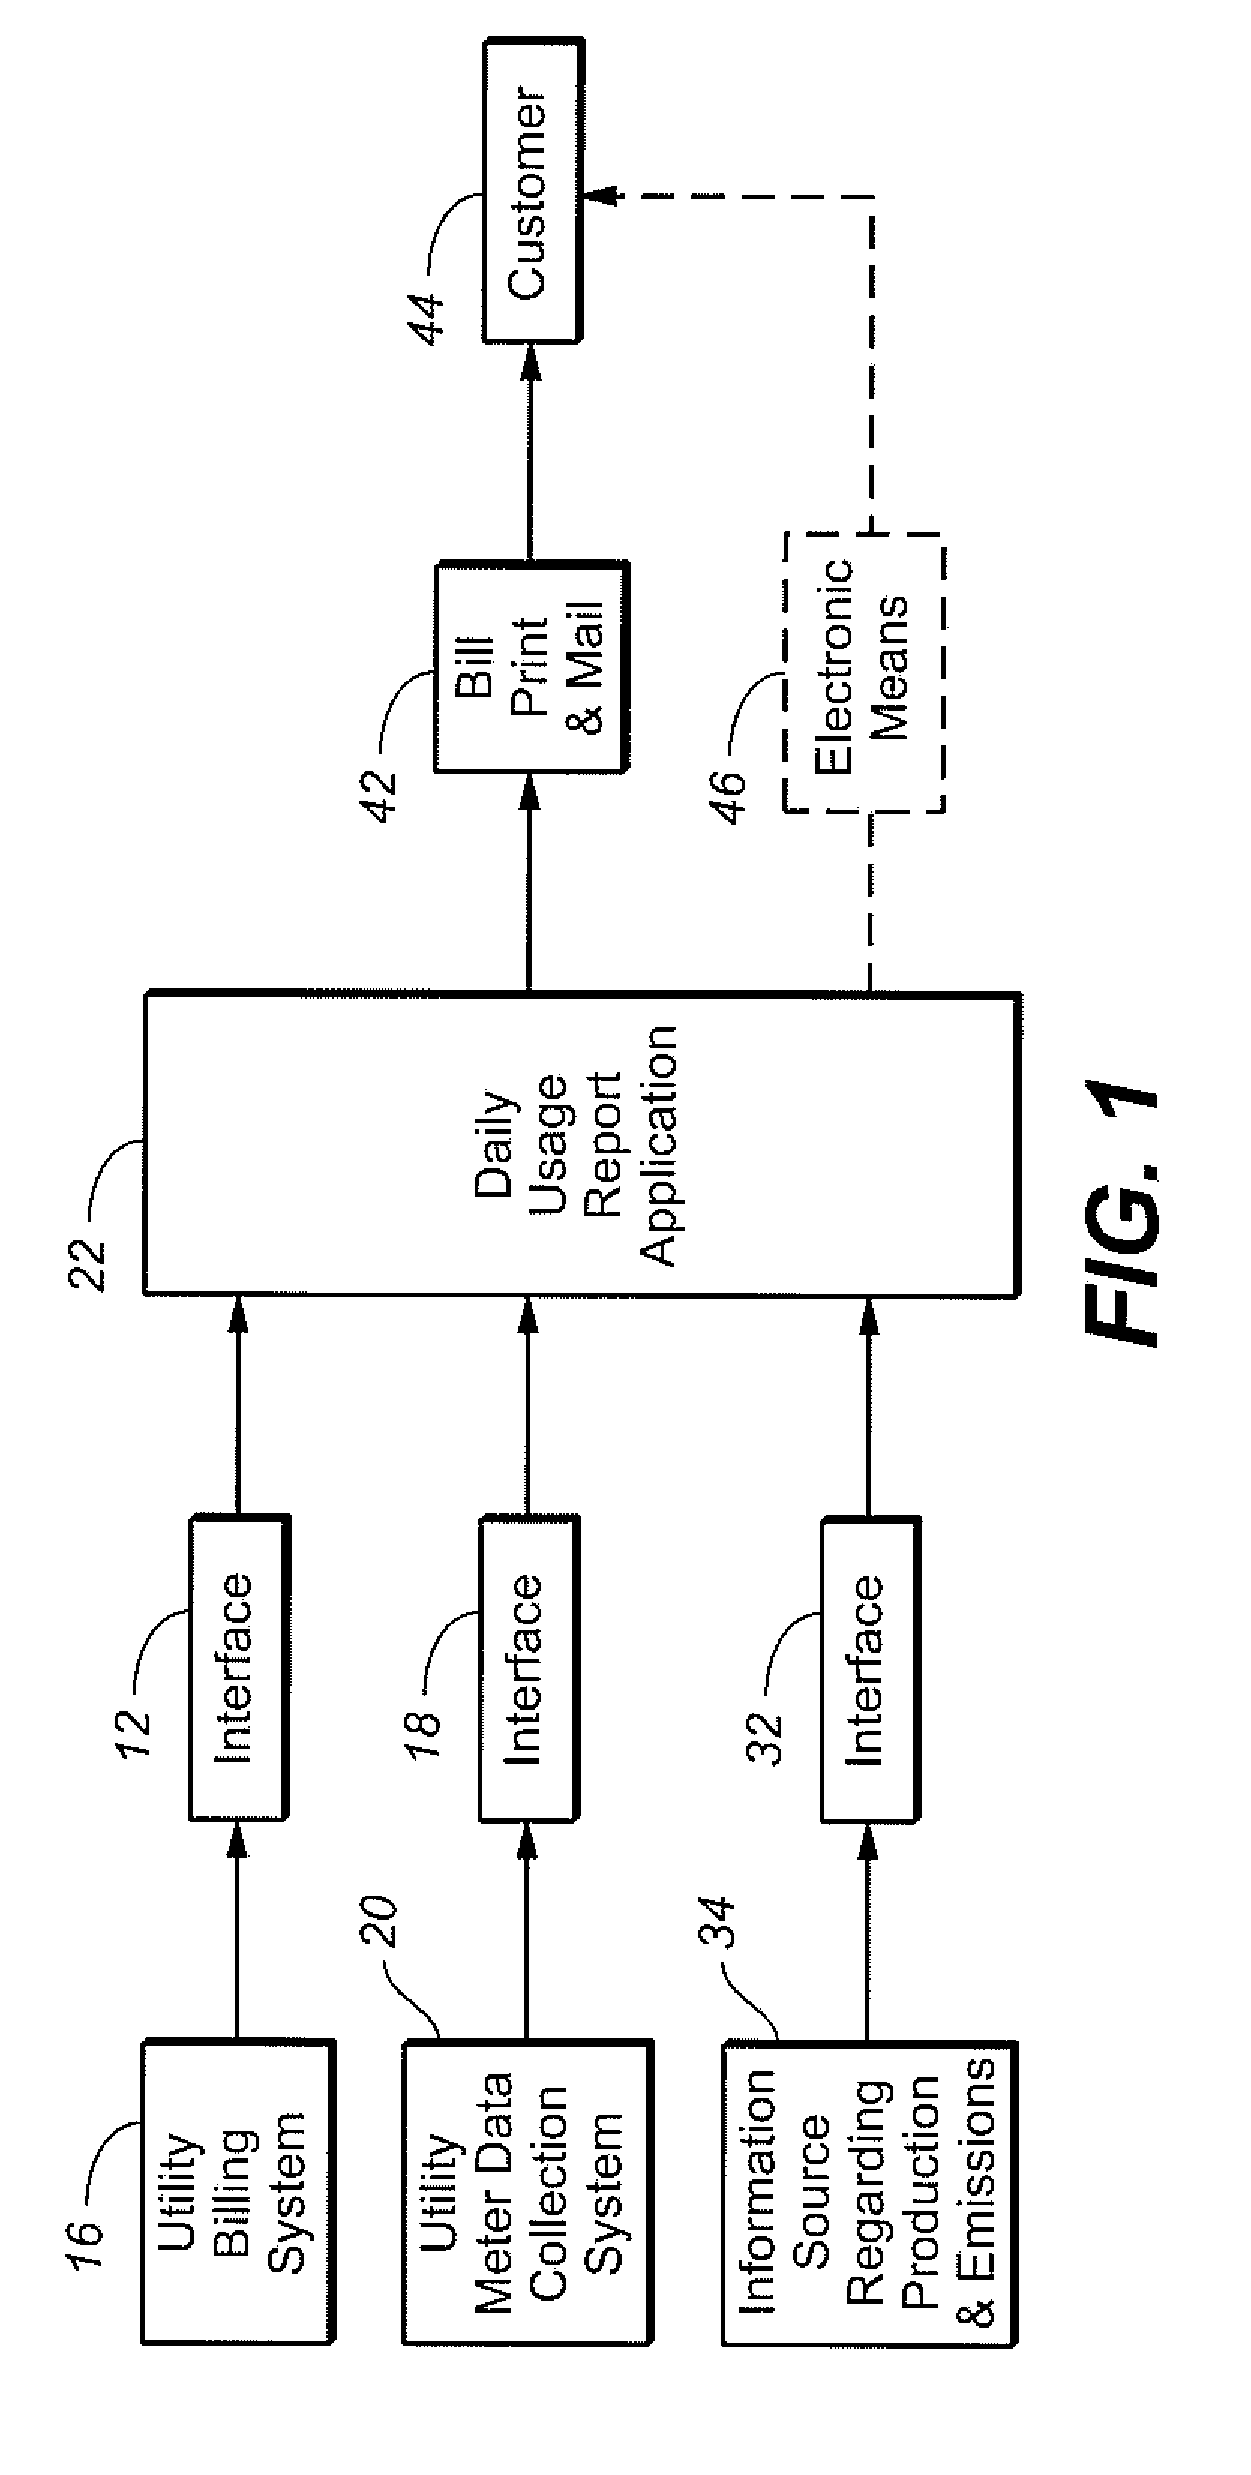 System and method for providing utility consumption as shown on periodic utility bills and associated carbon emissions